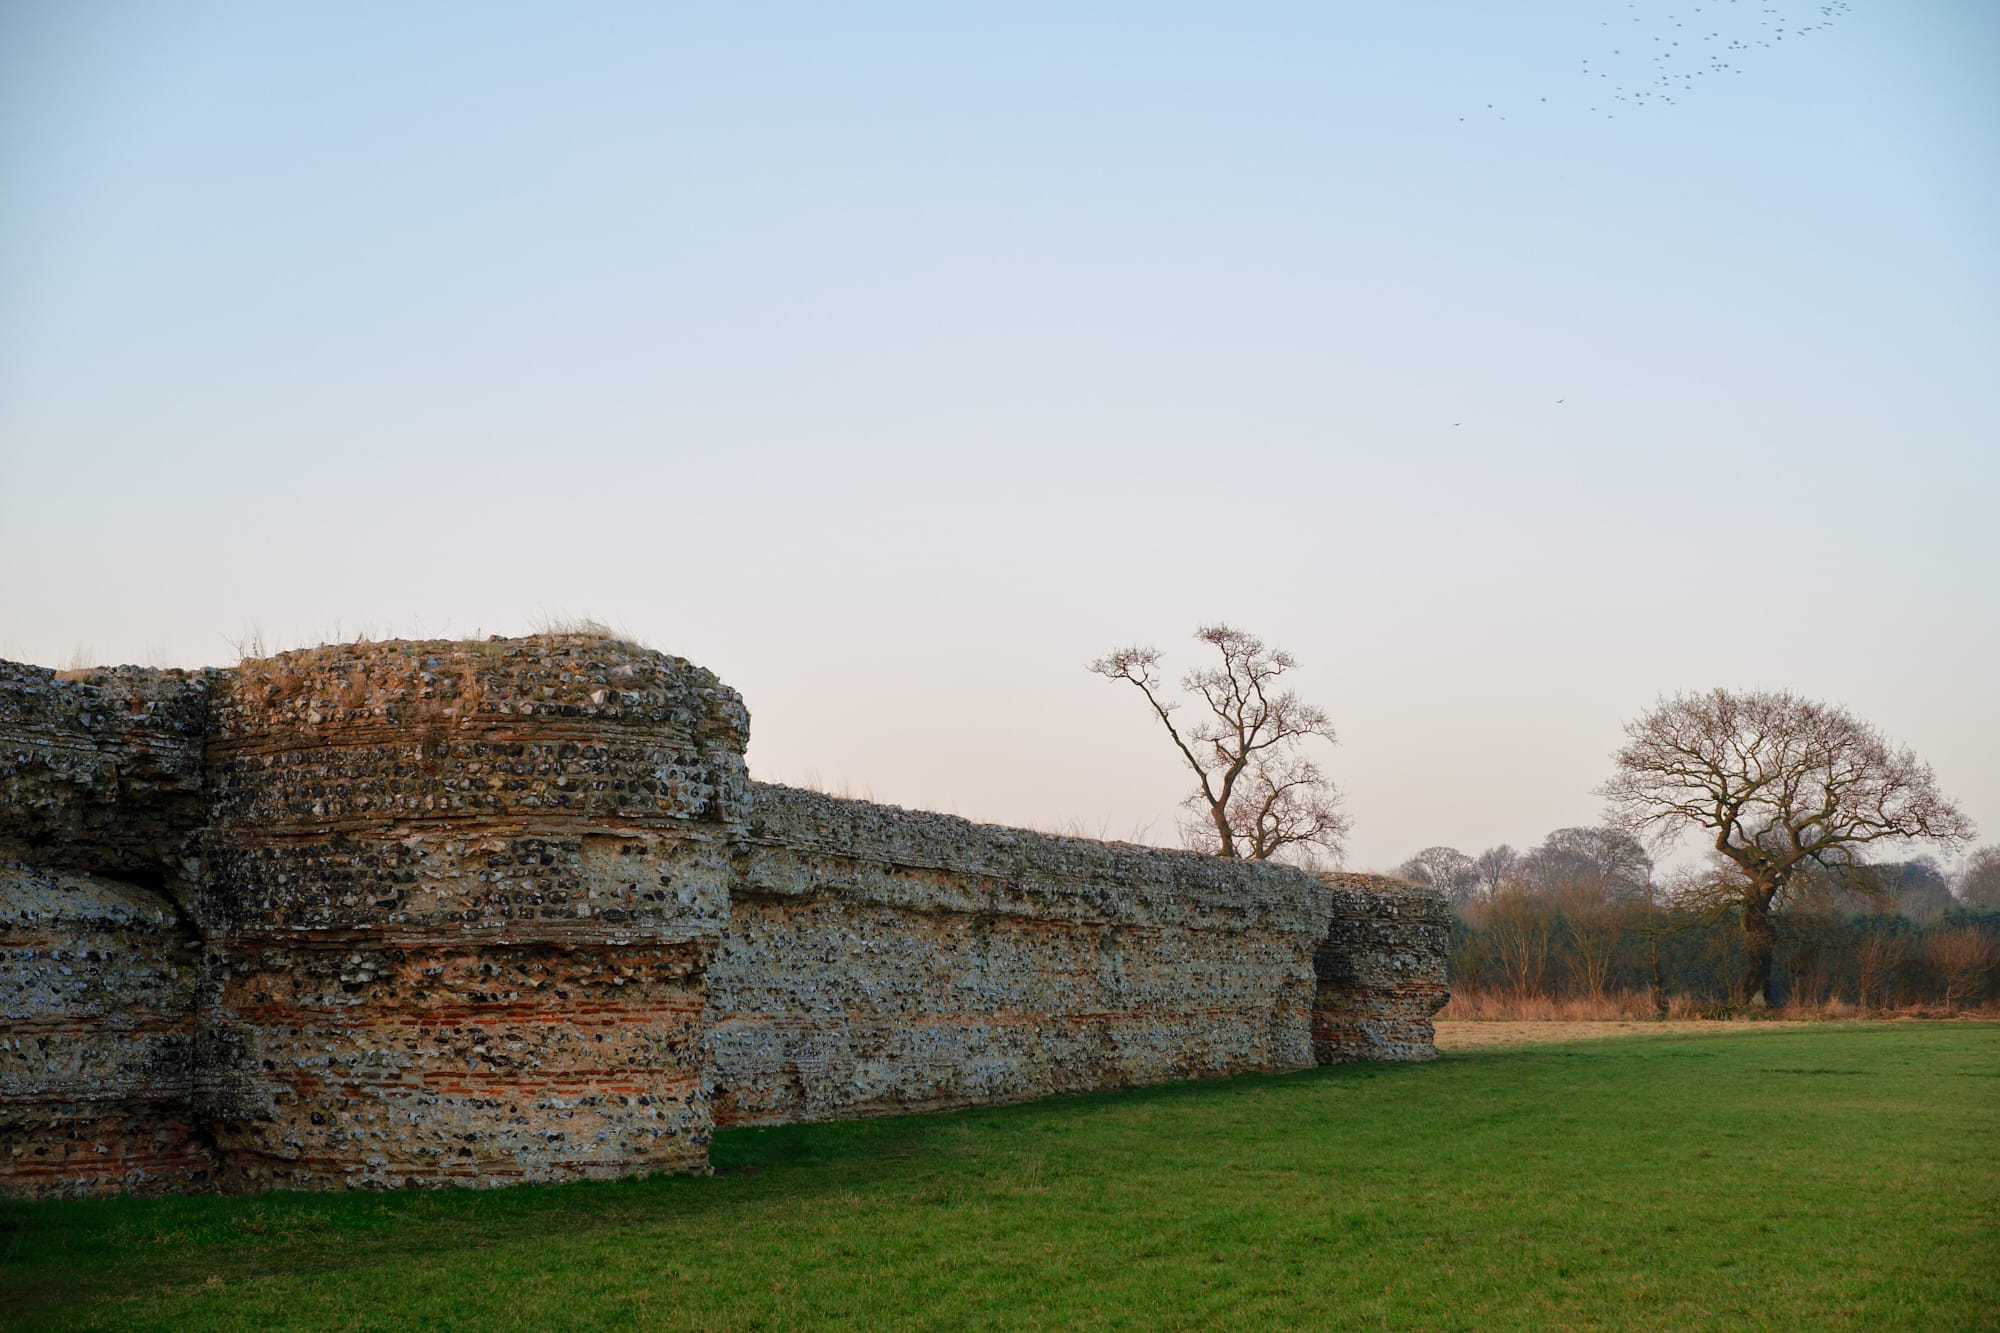 eastern wall of the fort